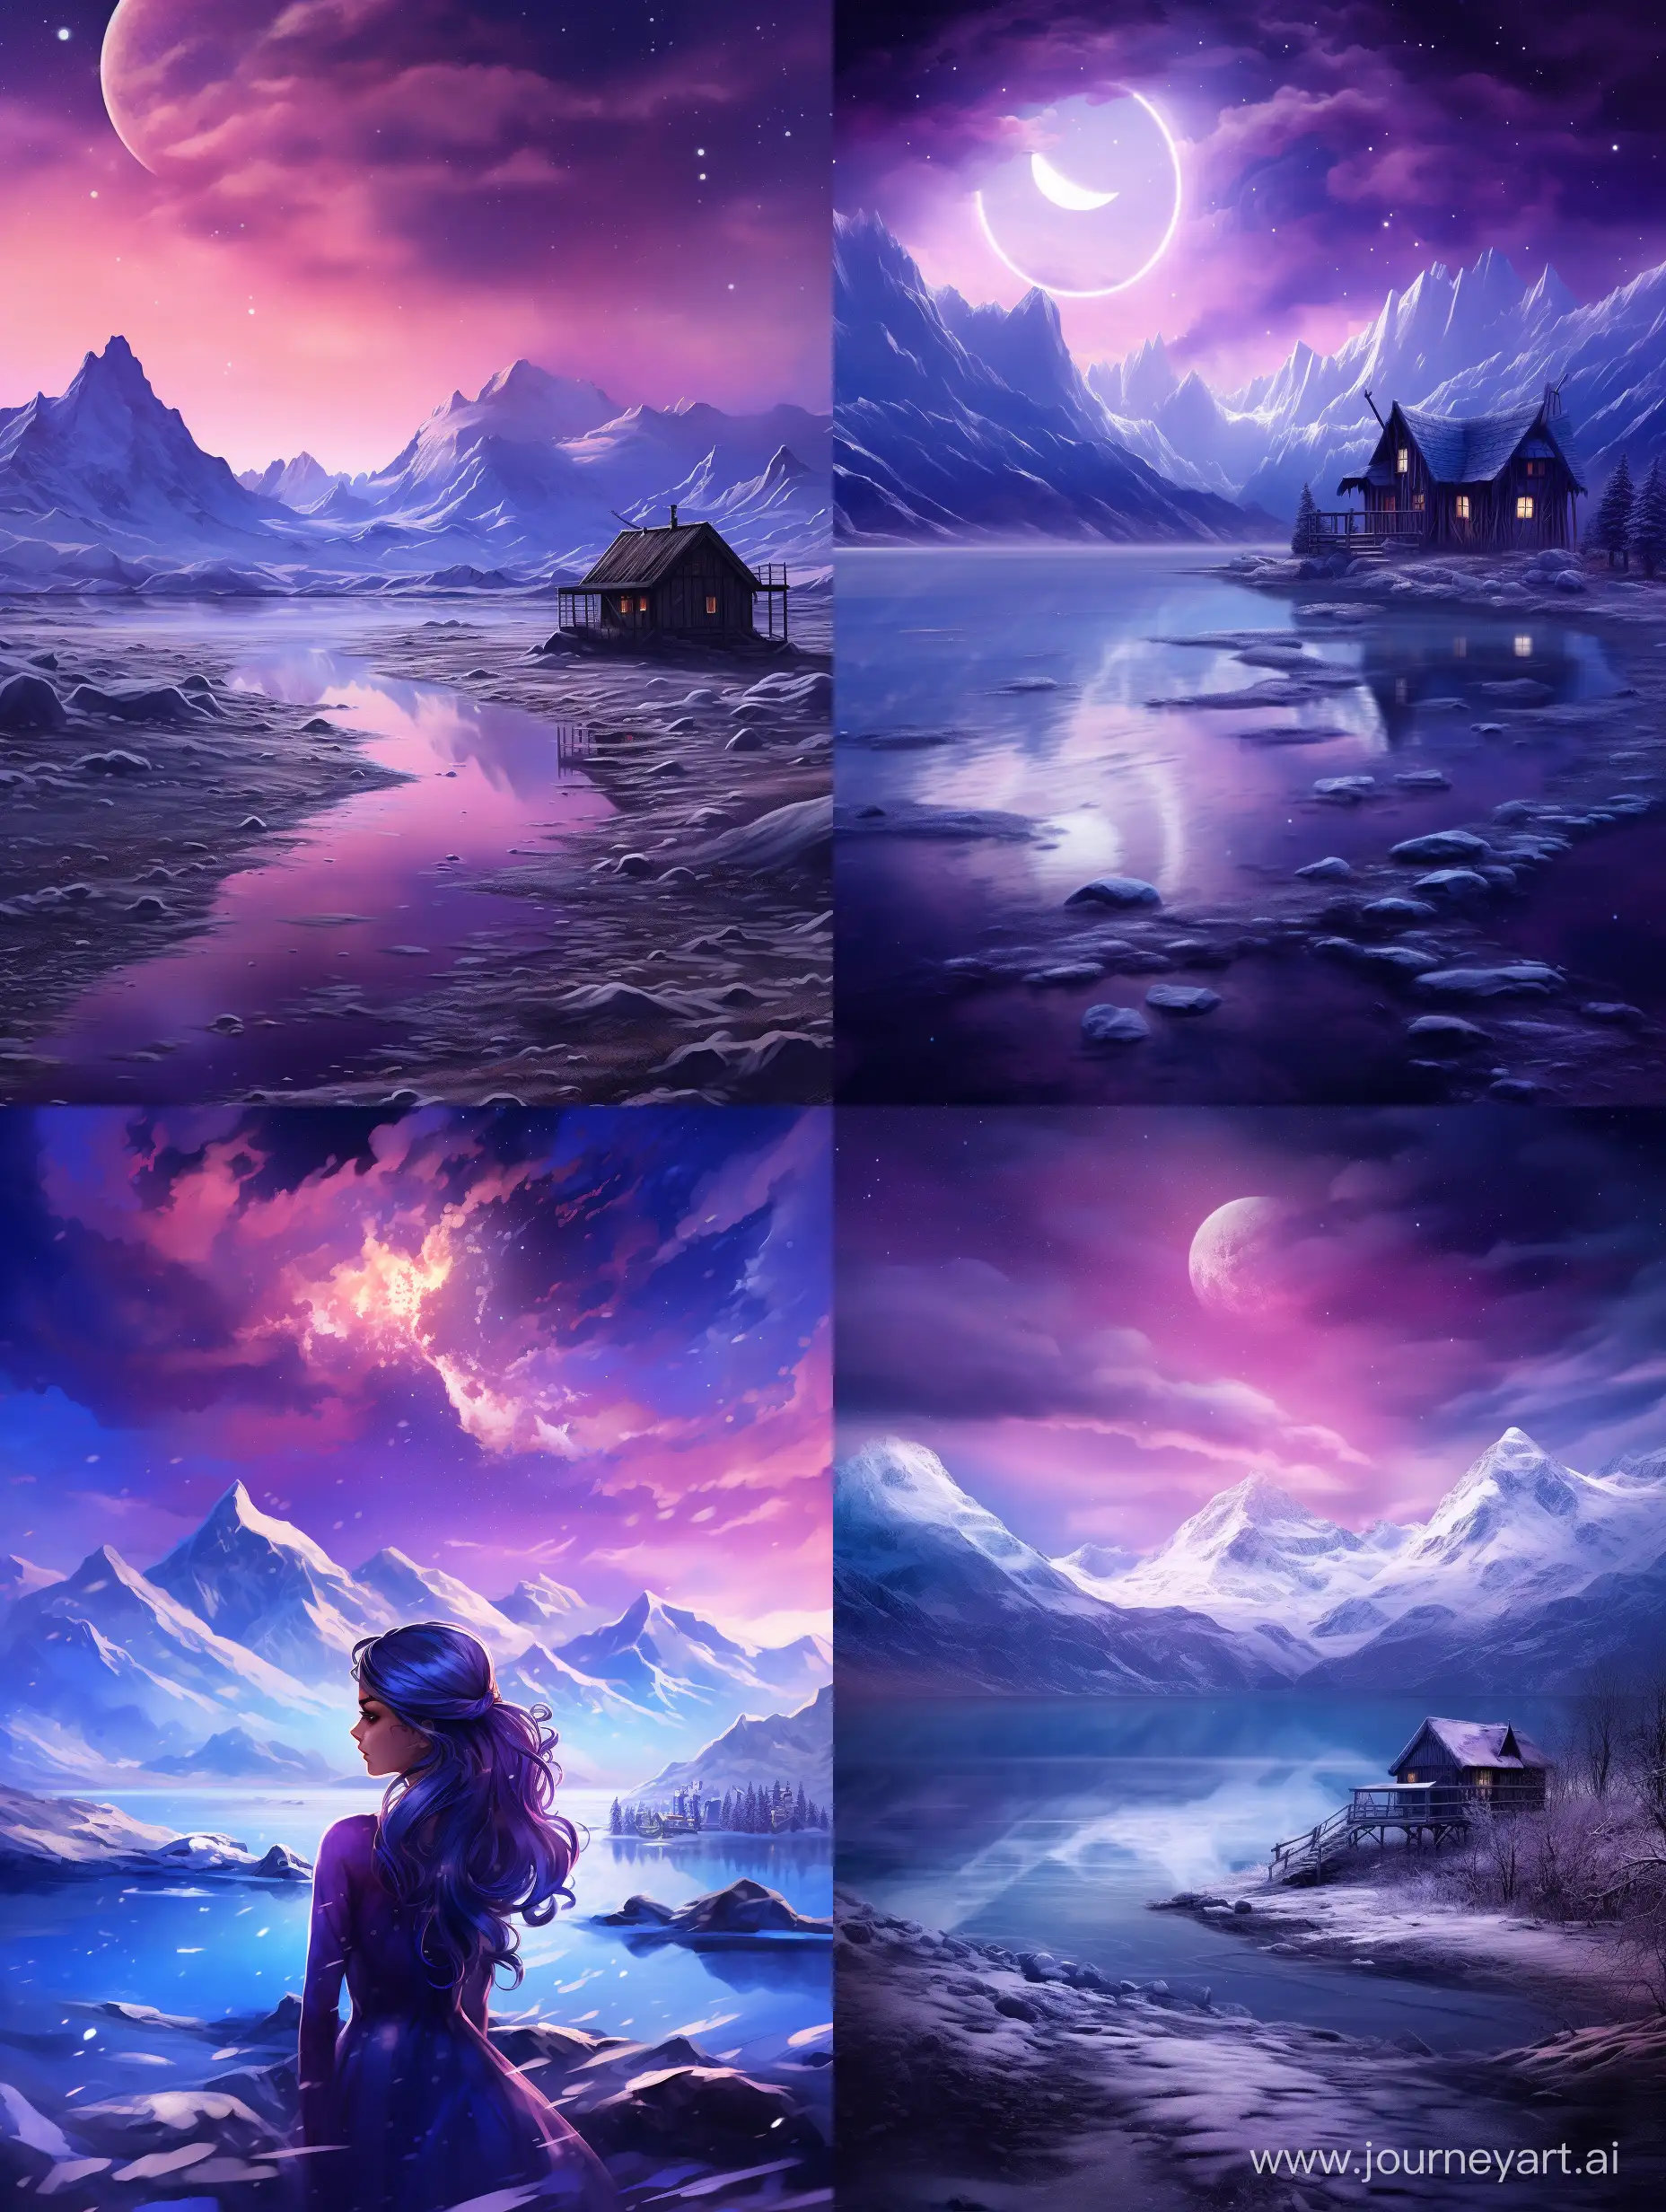 a galactic purple scenery with a wooden minimal house, snow around, a little tide at foreground, mountains at the background, phantasy, realistic